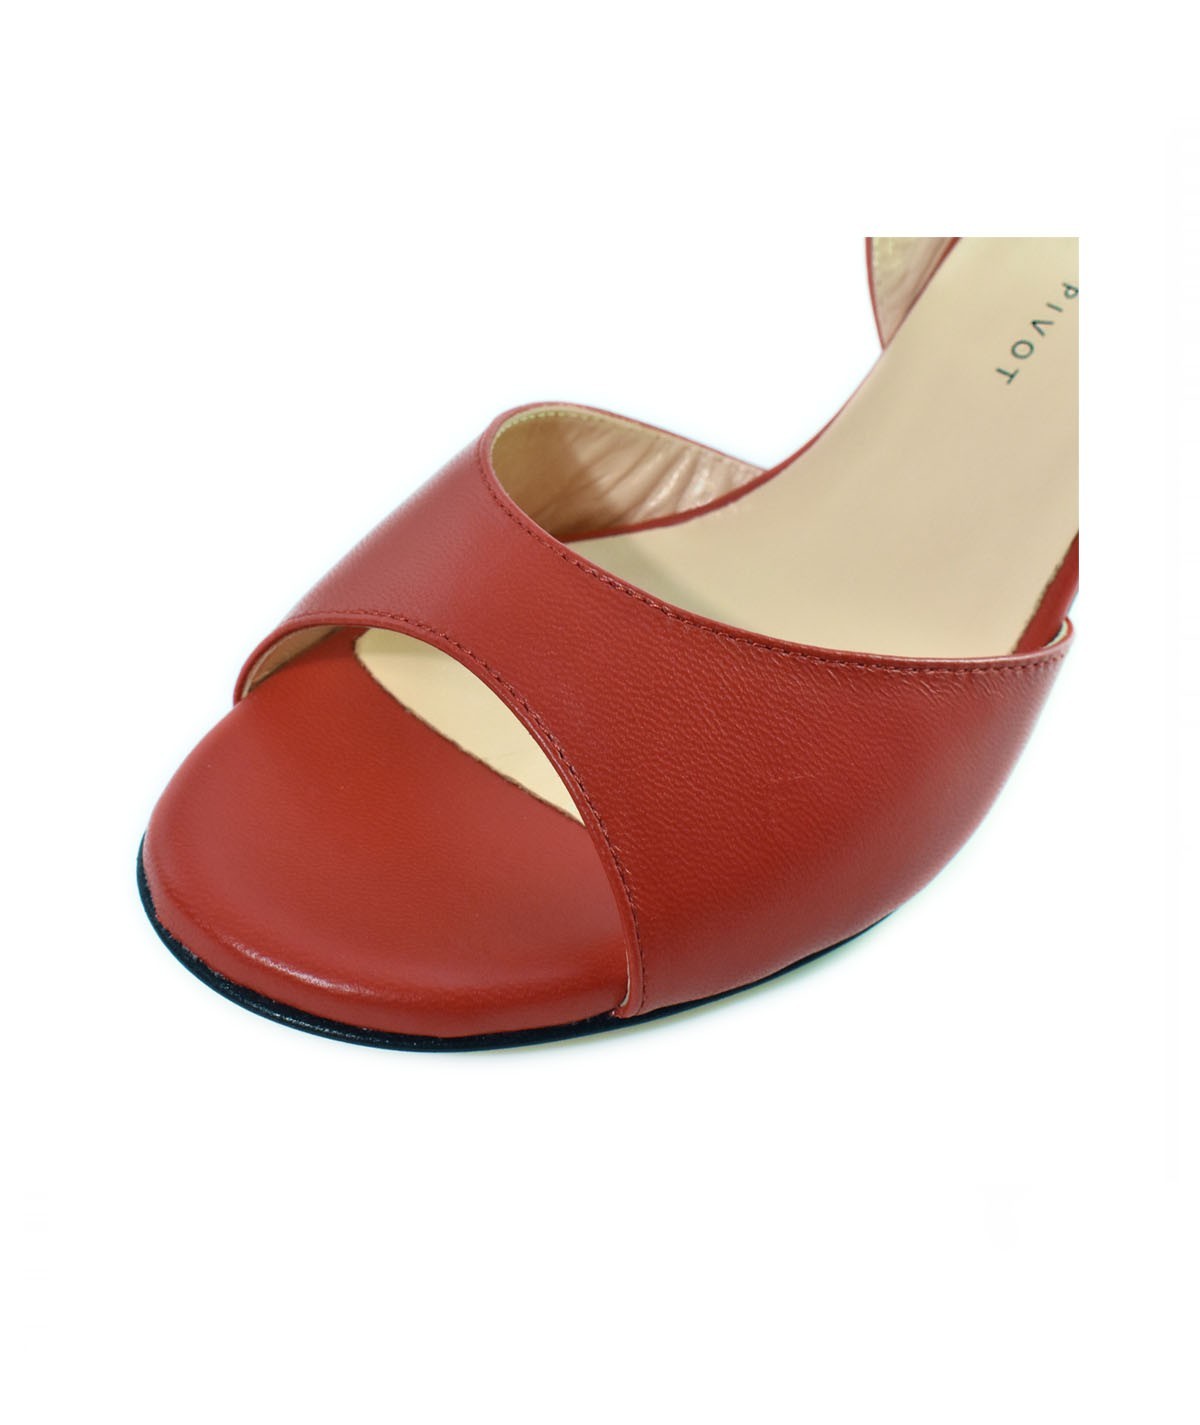 CHERIE T50 MM smooth leather red